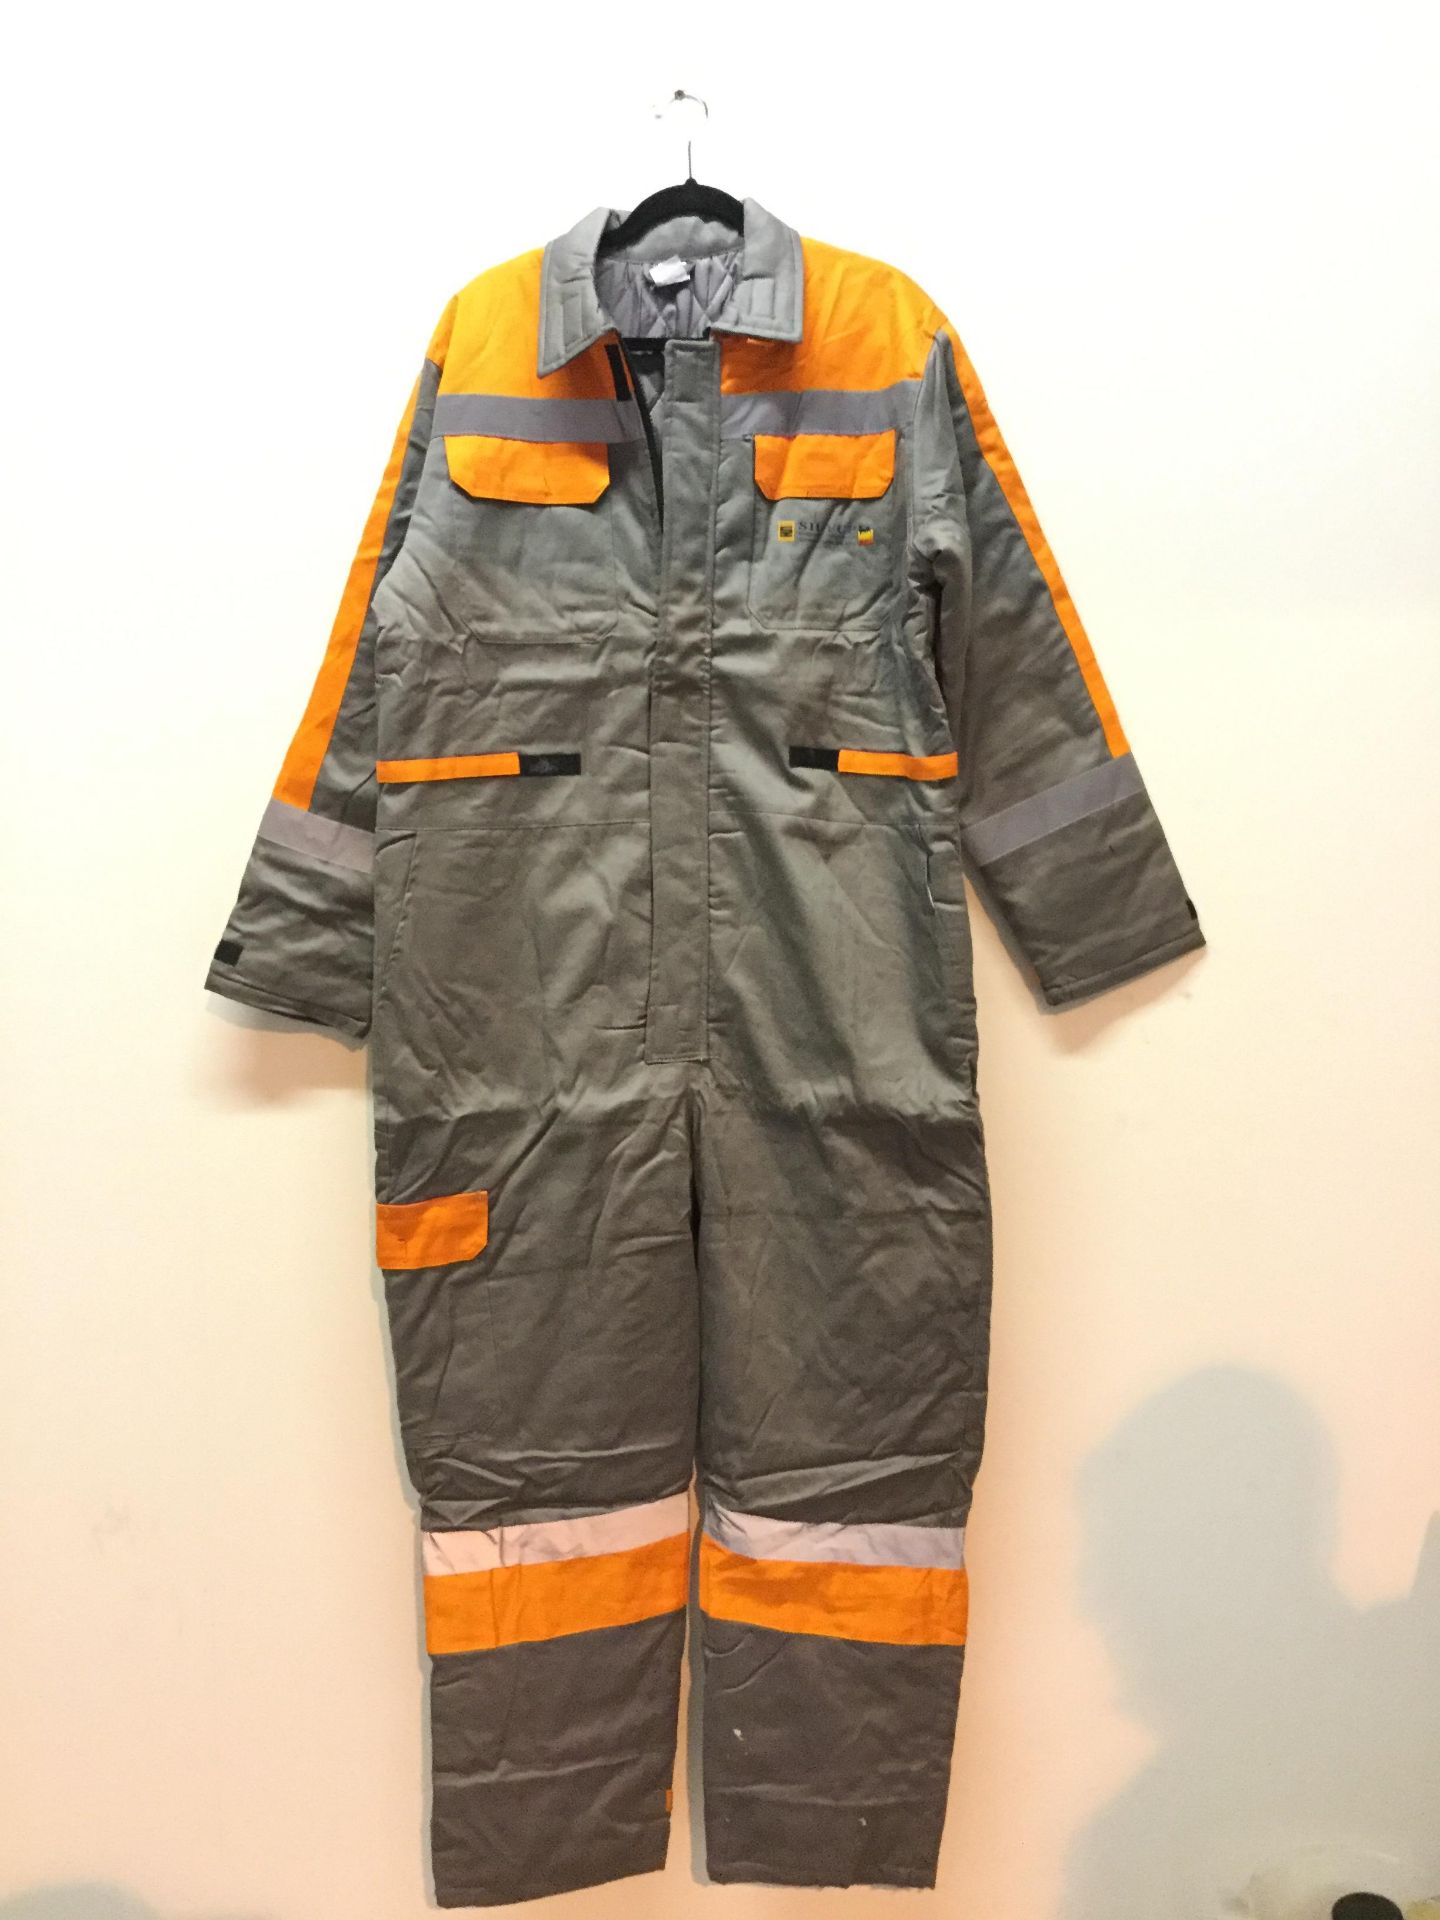 Flame Retardant Winter Coveralls - Size 54 - Image 2 of 2